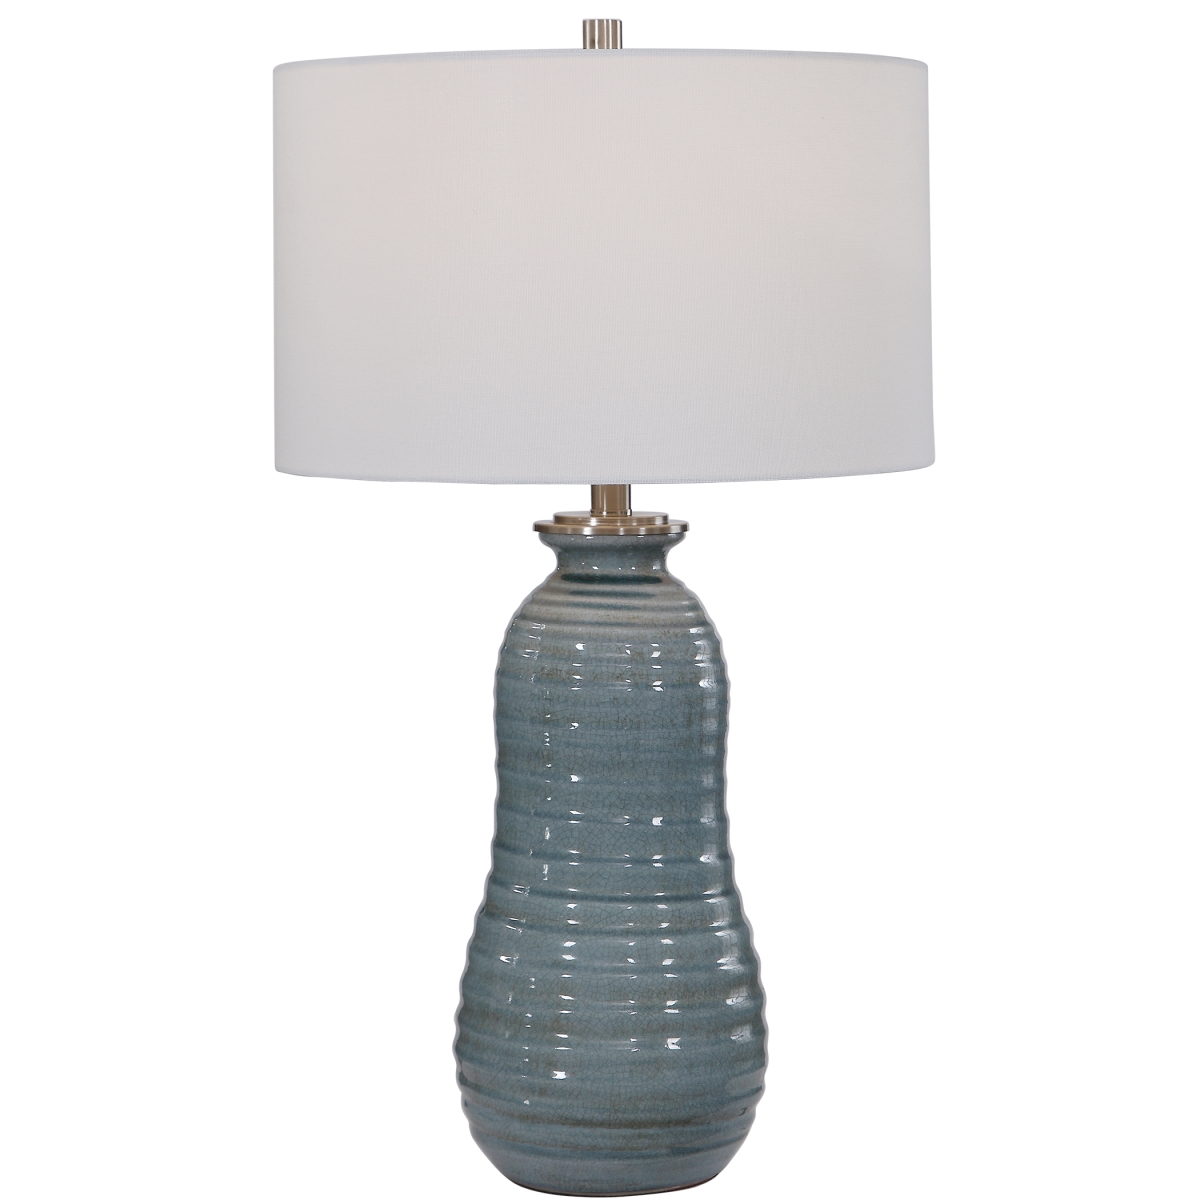 Picture of 212 Main 26362-1 Zaila Light Blue Table Lamp